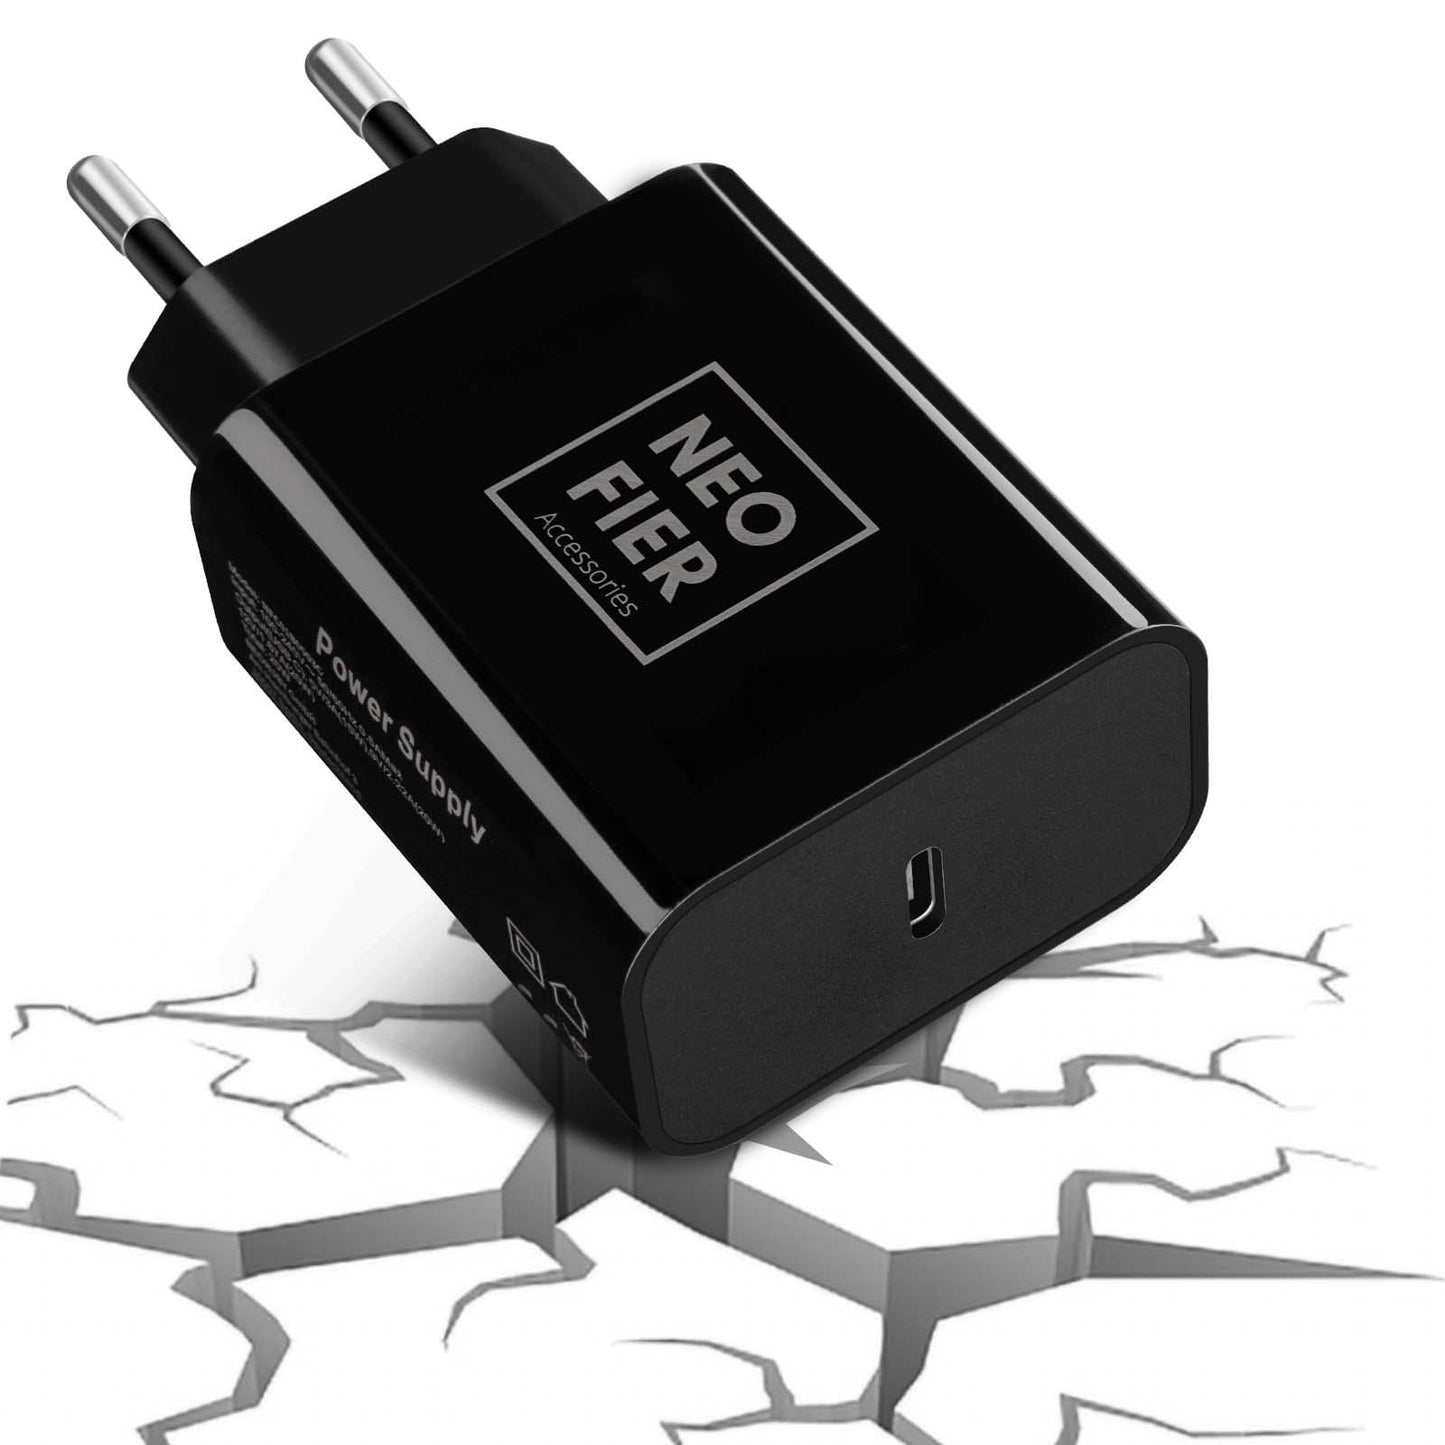 USB-C Wall Charger Adapter - 10V / Black